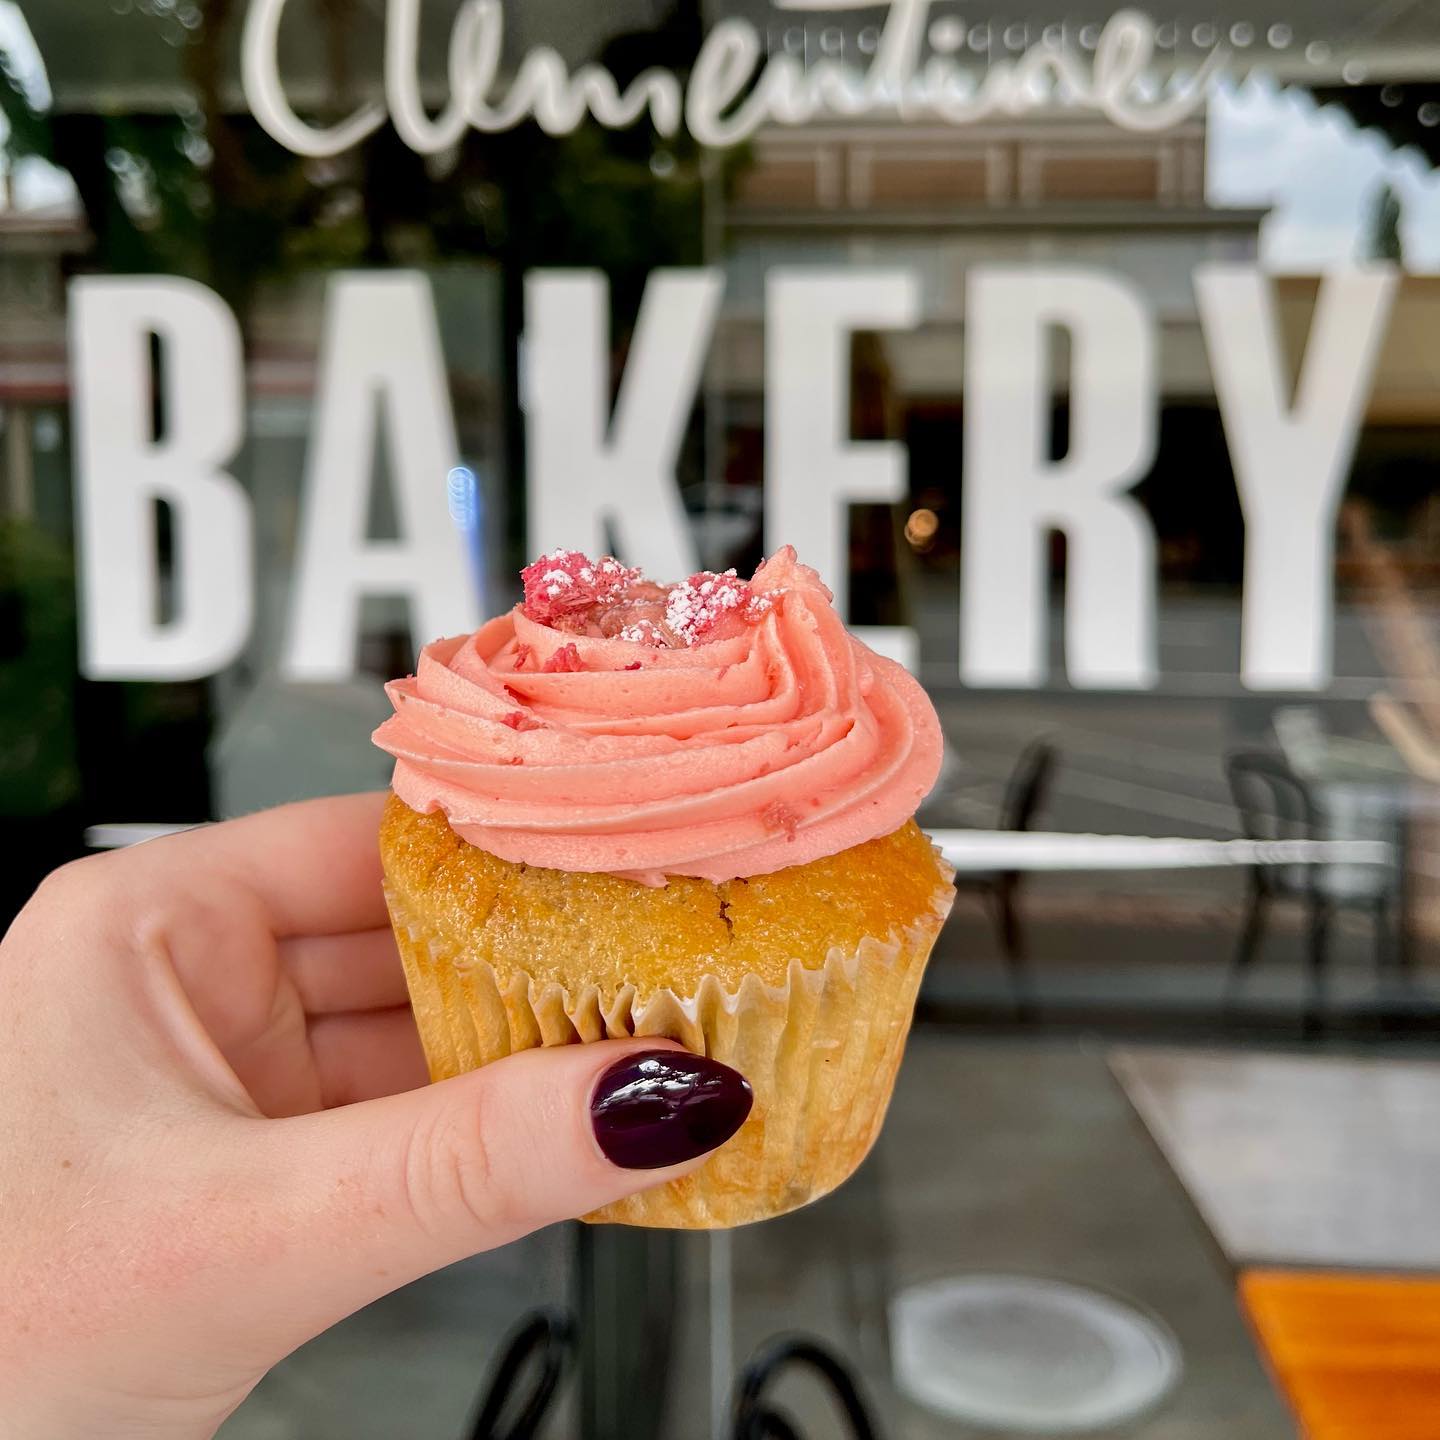 Clementine Bakery in Yass rises above the rest